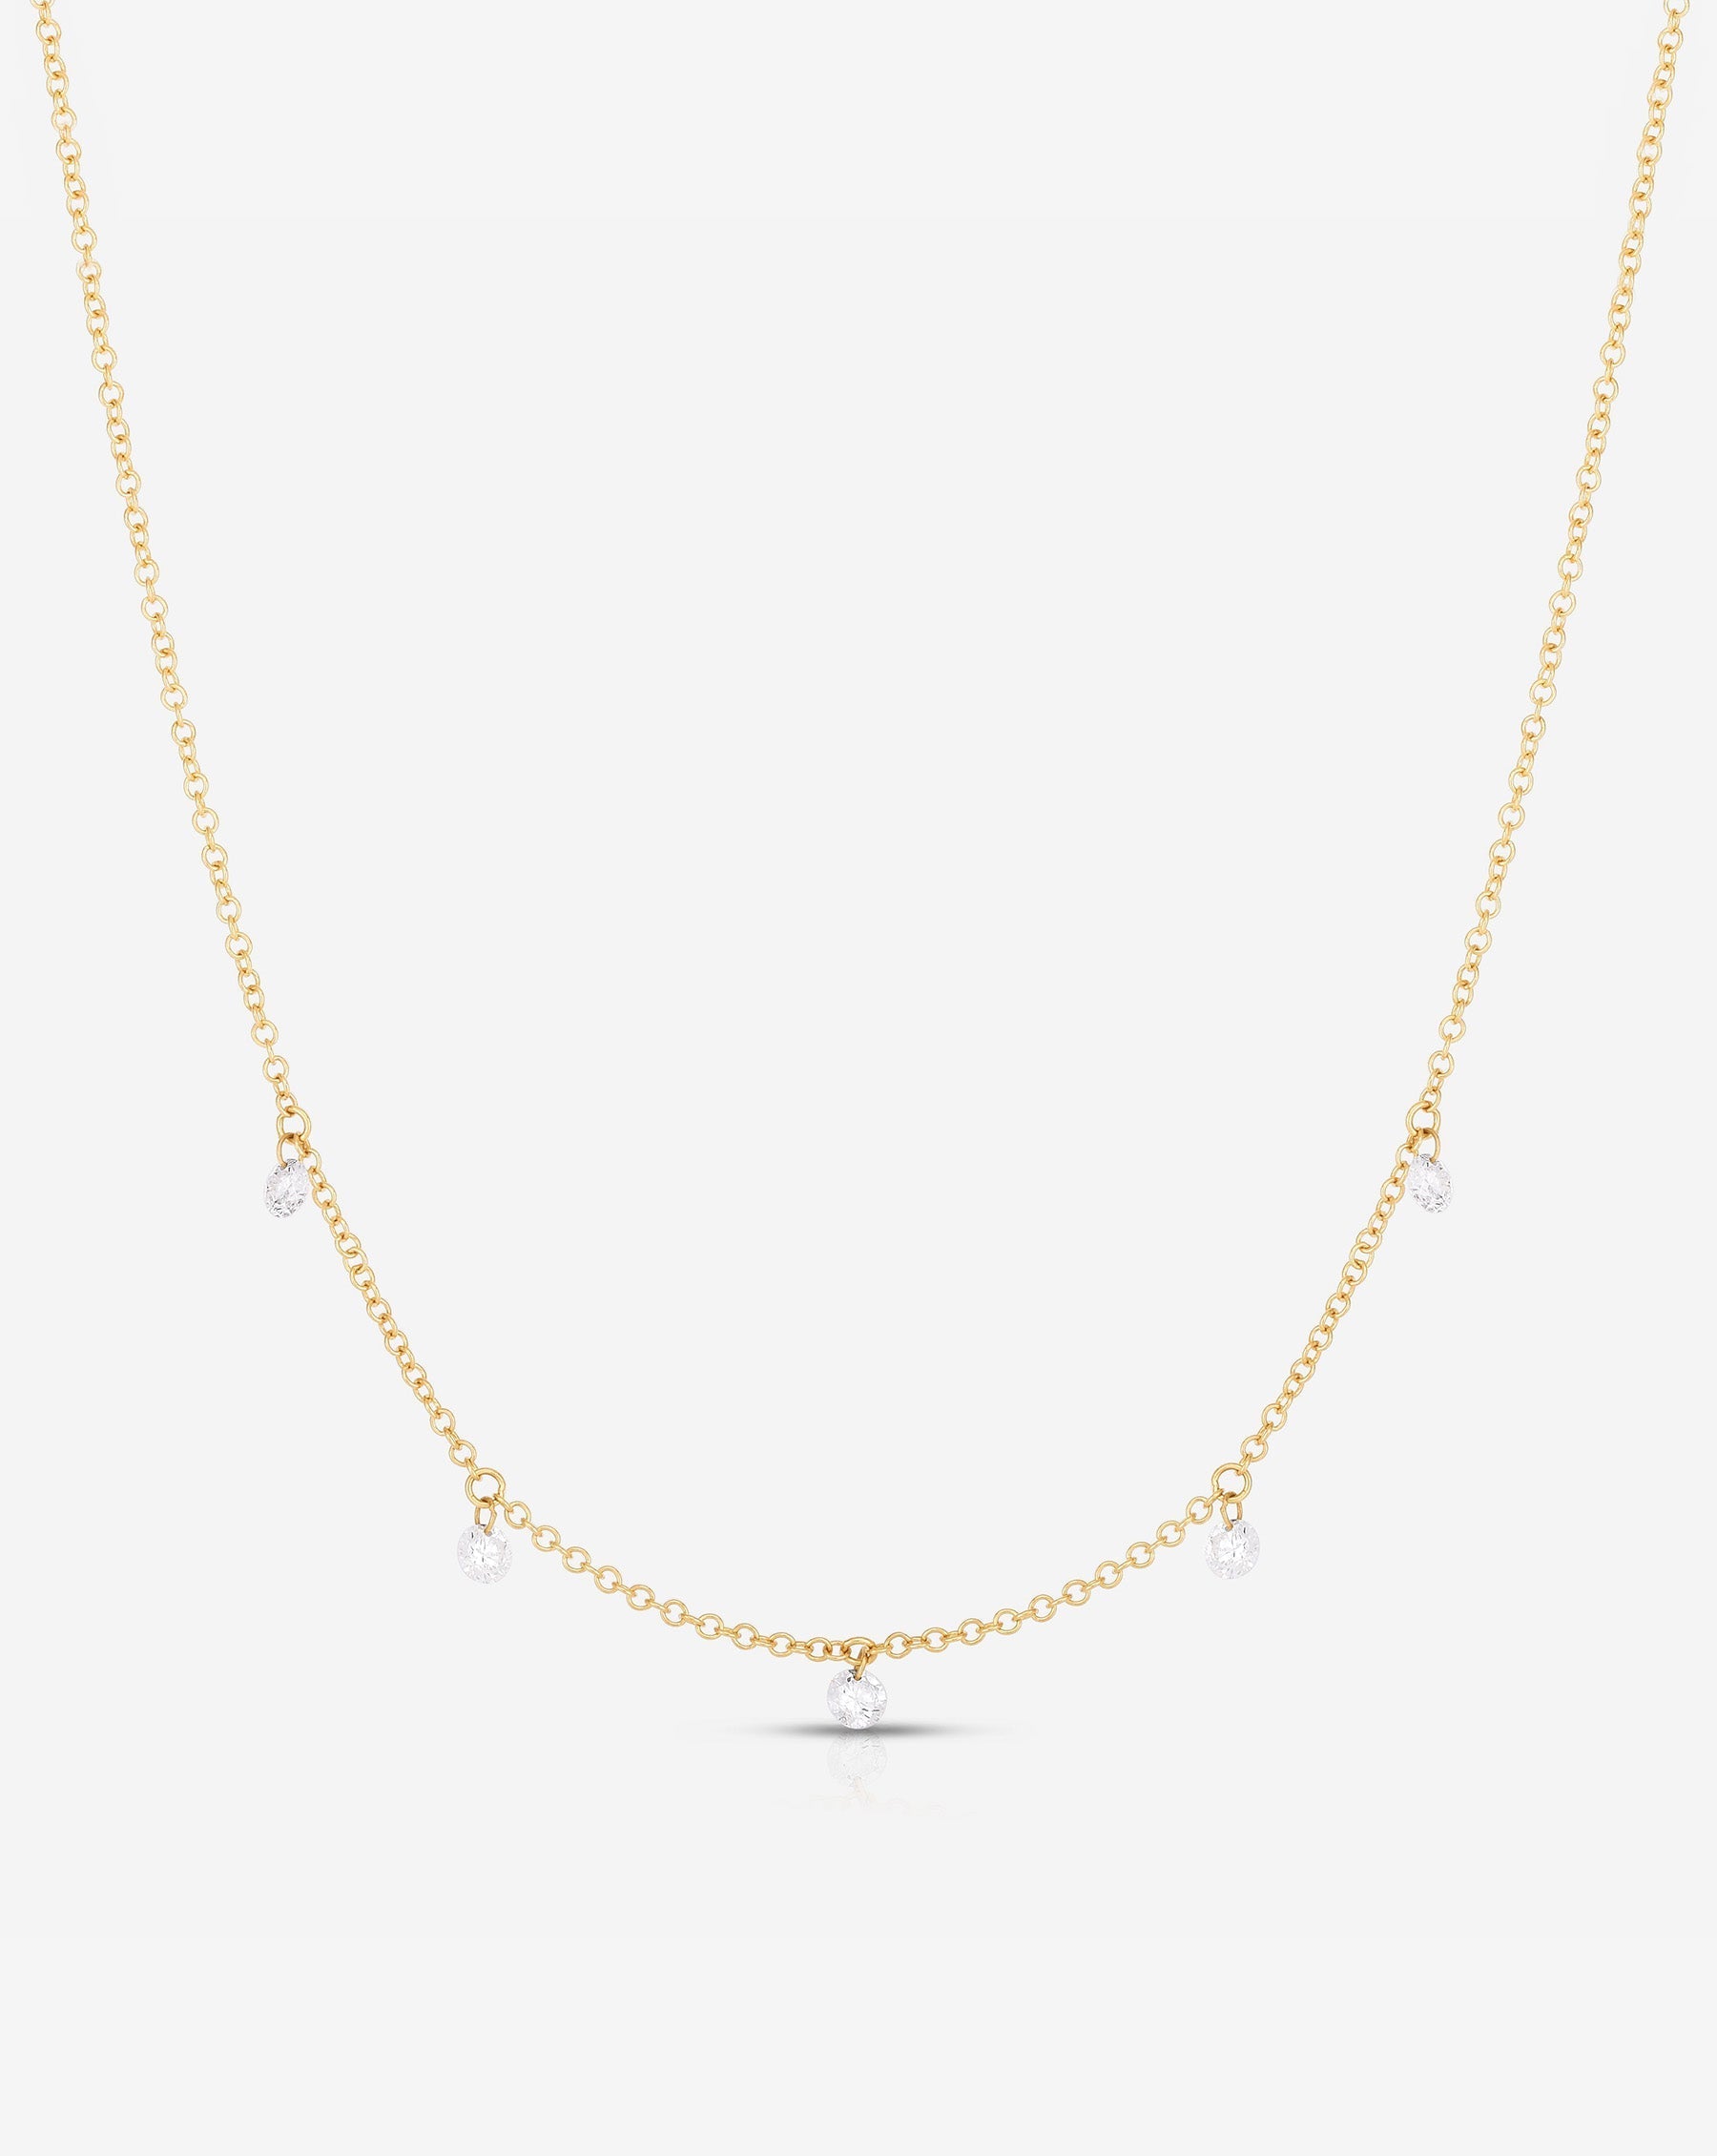 What Is A Floating Diamond Necklace? | Shiels – Shiels Jewellers